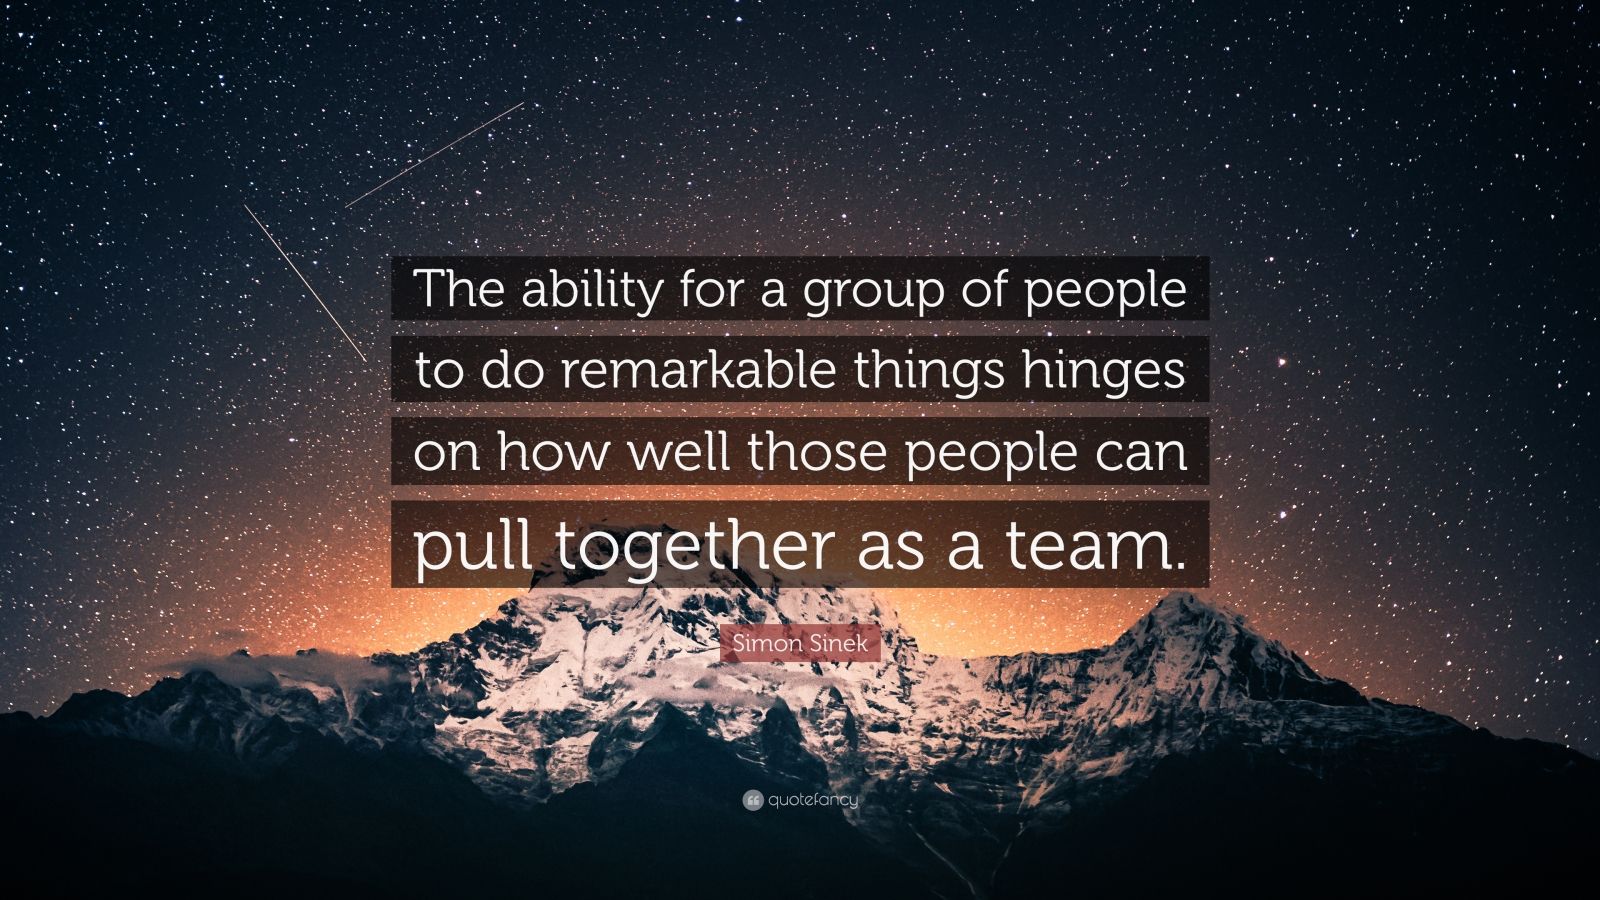 Simon Sinek Quote: “The ability for a group of people to do remarkable